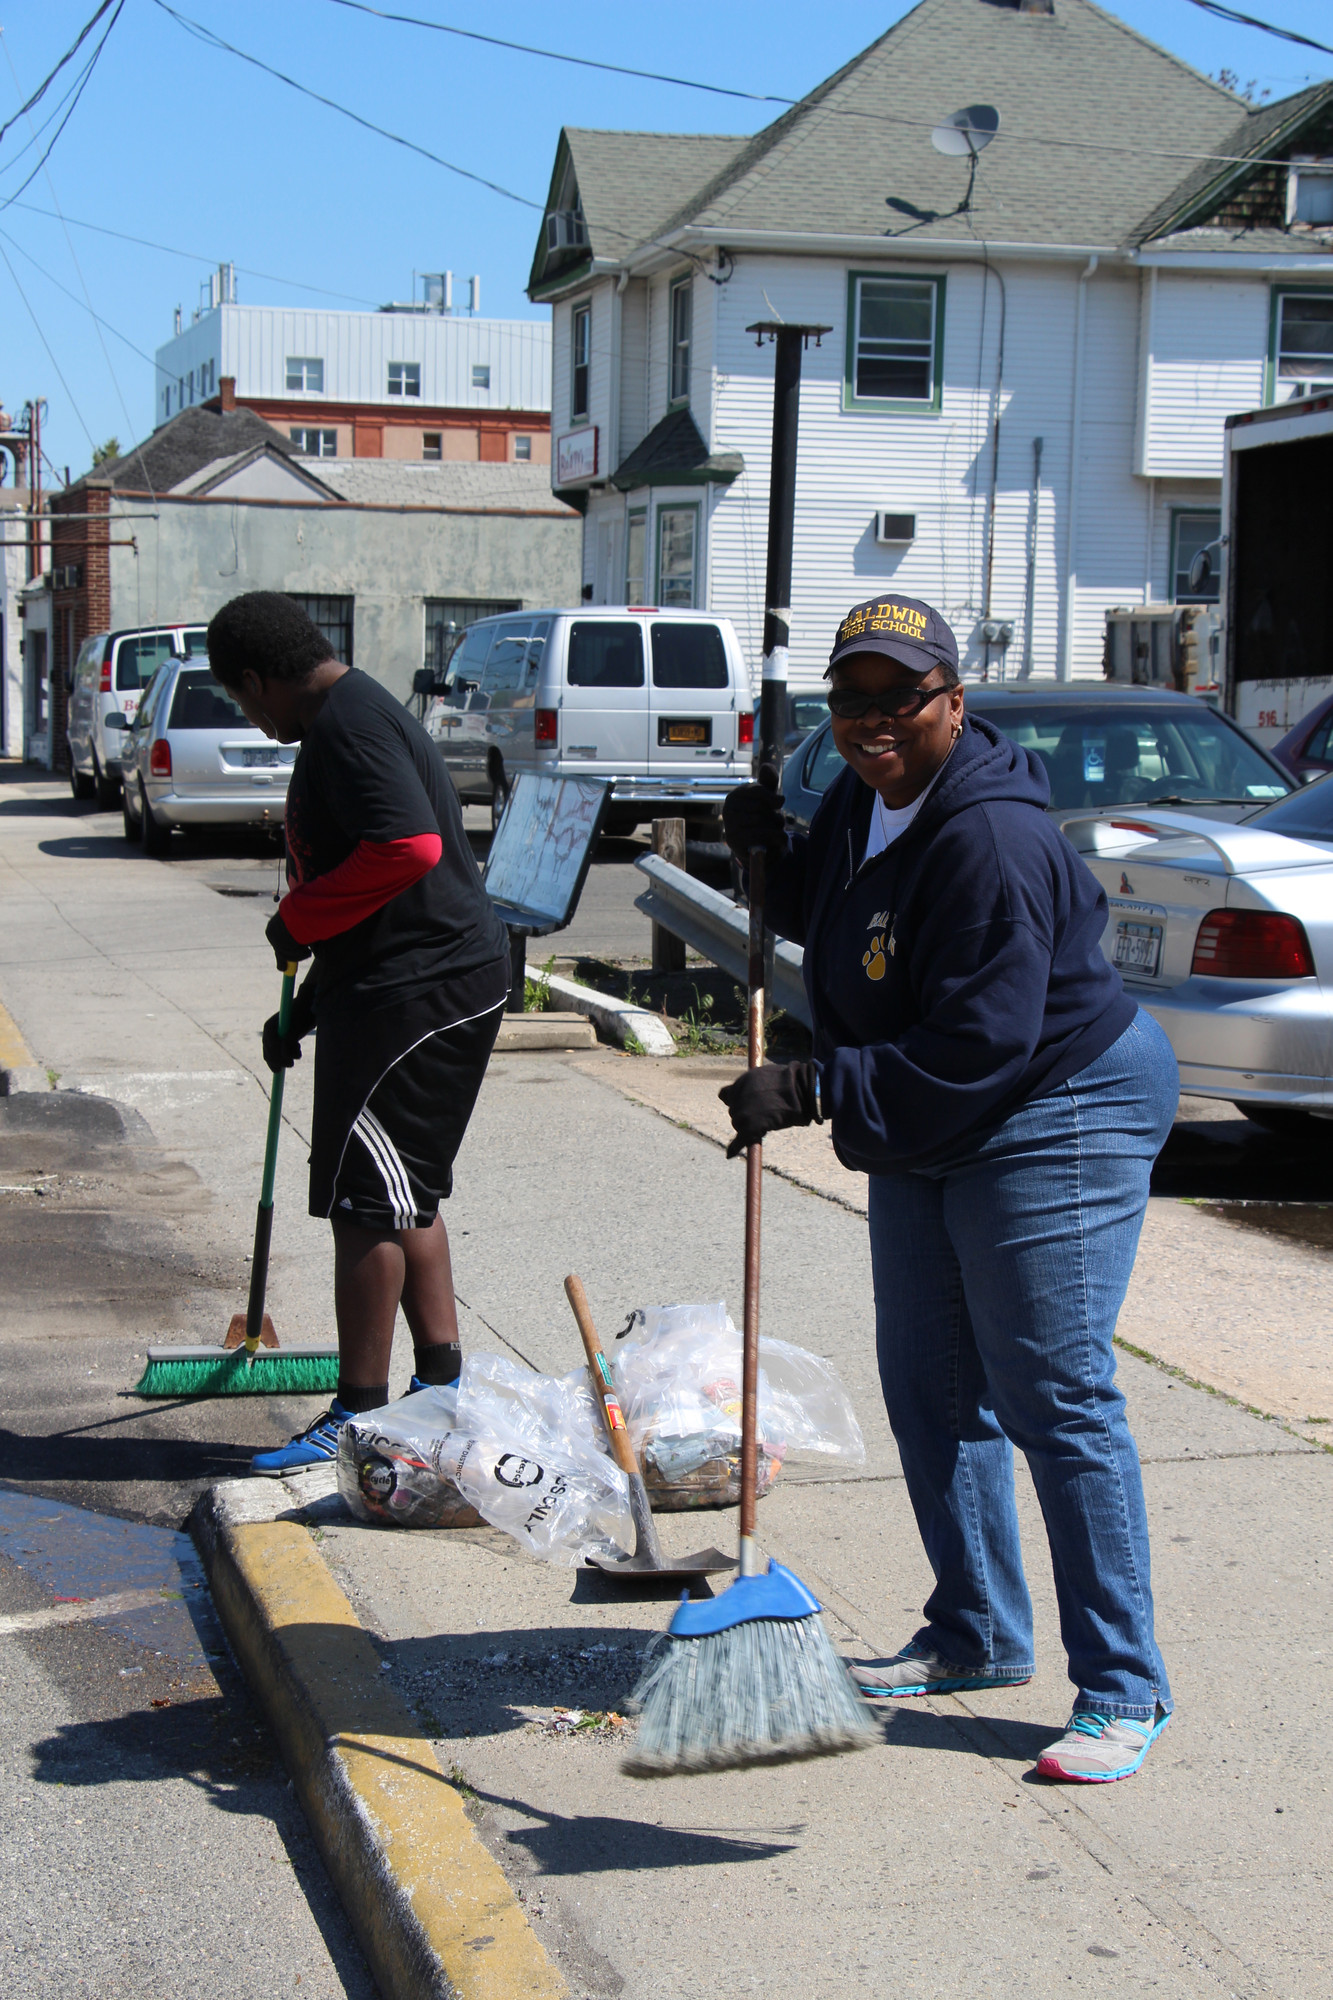 Karyn Reid and her son Avery swept and cleaned up debris on Grand Avenue, in preparation for the Memorial Day Parade the following weekend.